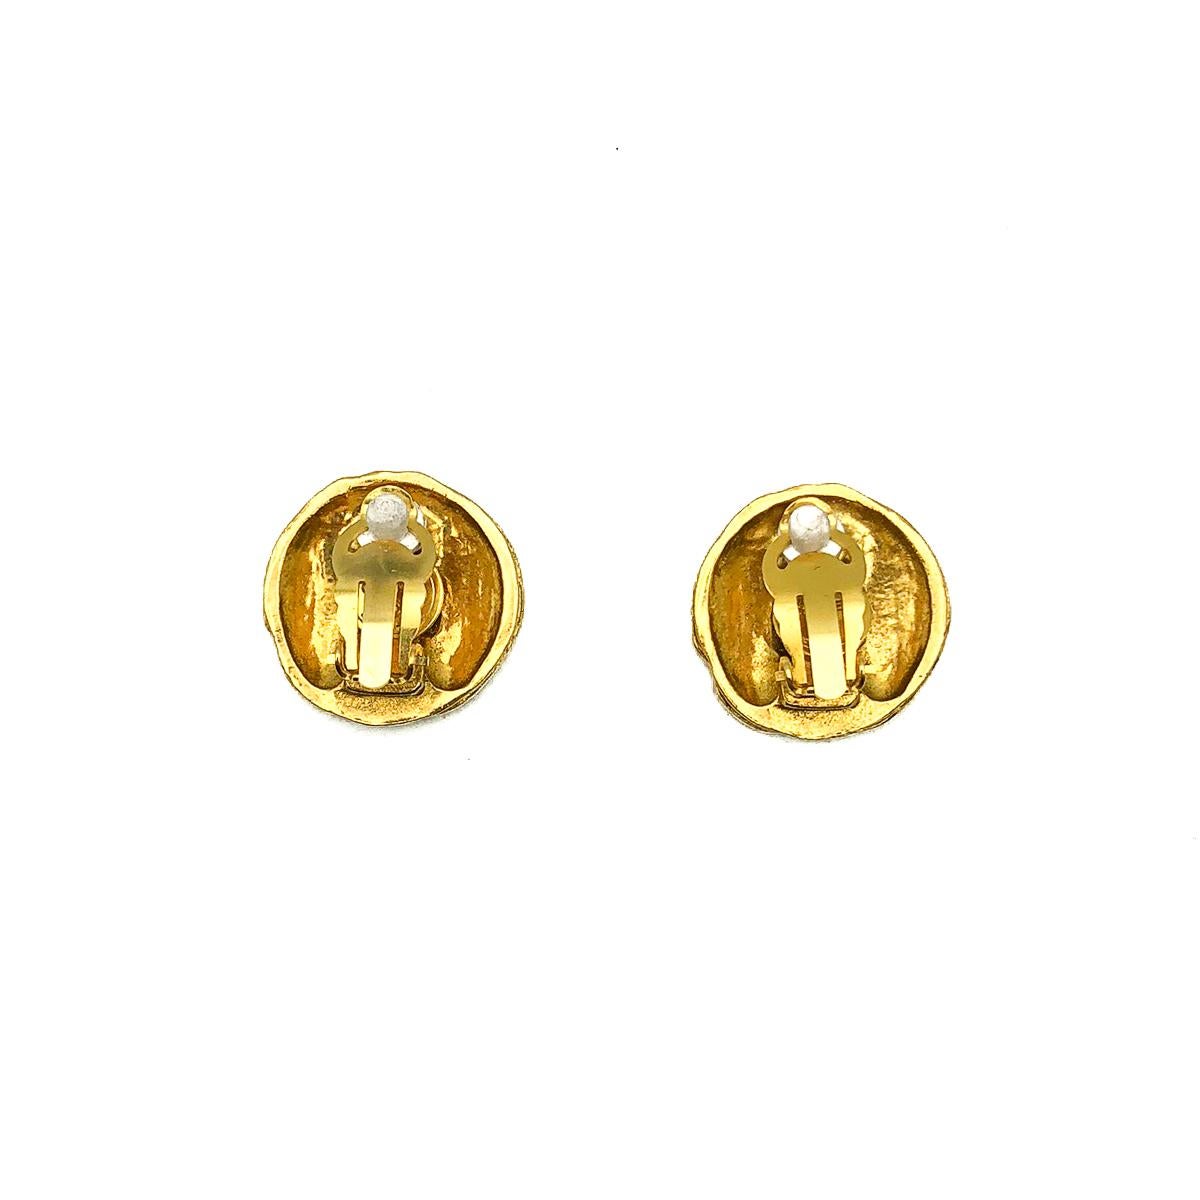 Vintage Chanel Interlocking CC Byzantine Inspired Coin Earrings 1980s In Good Condition For Sale In Wilmslow, GB